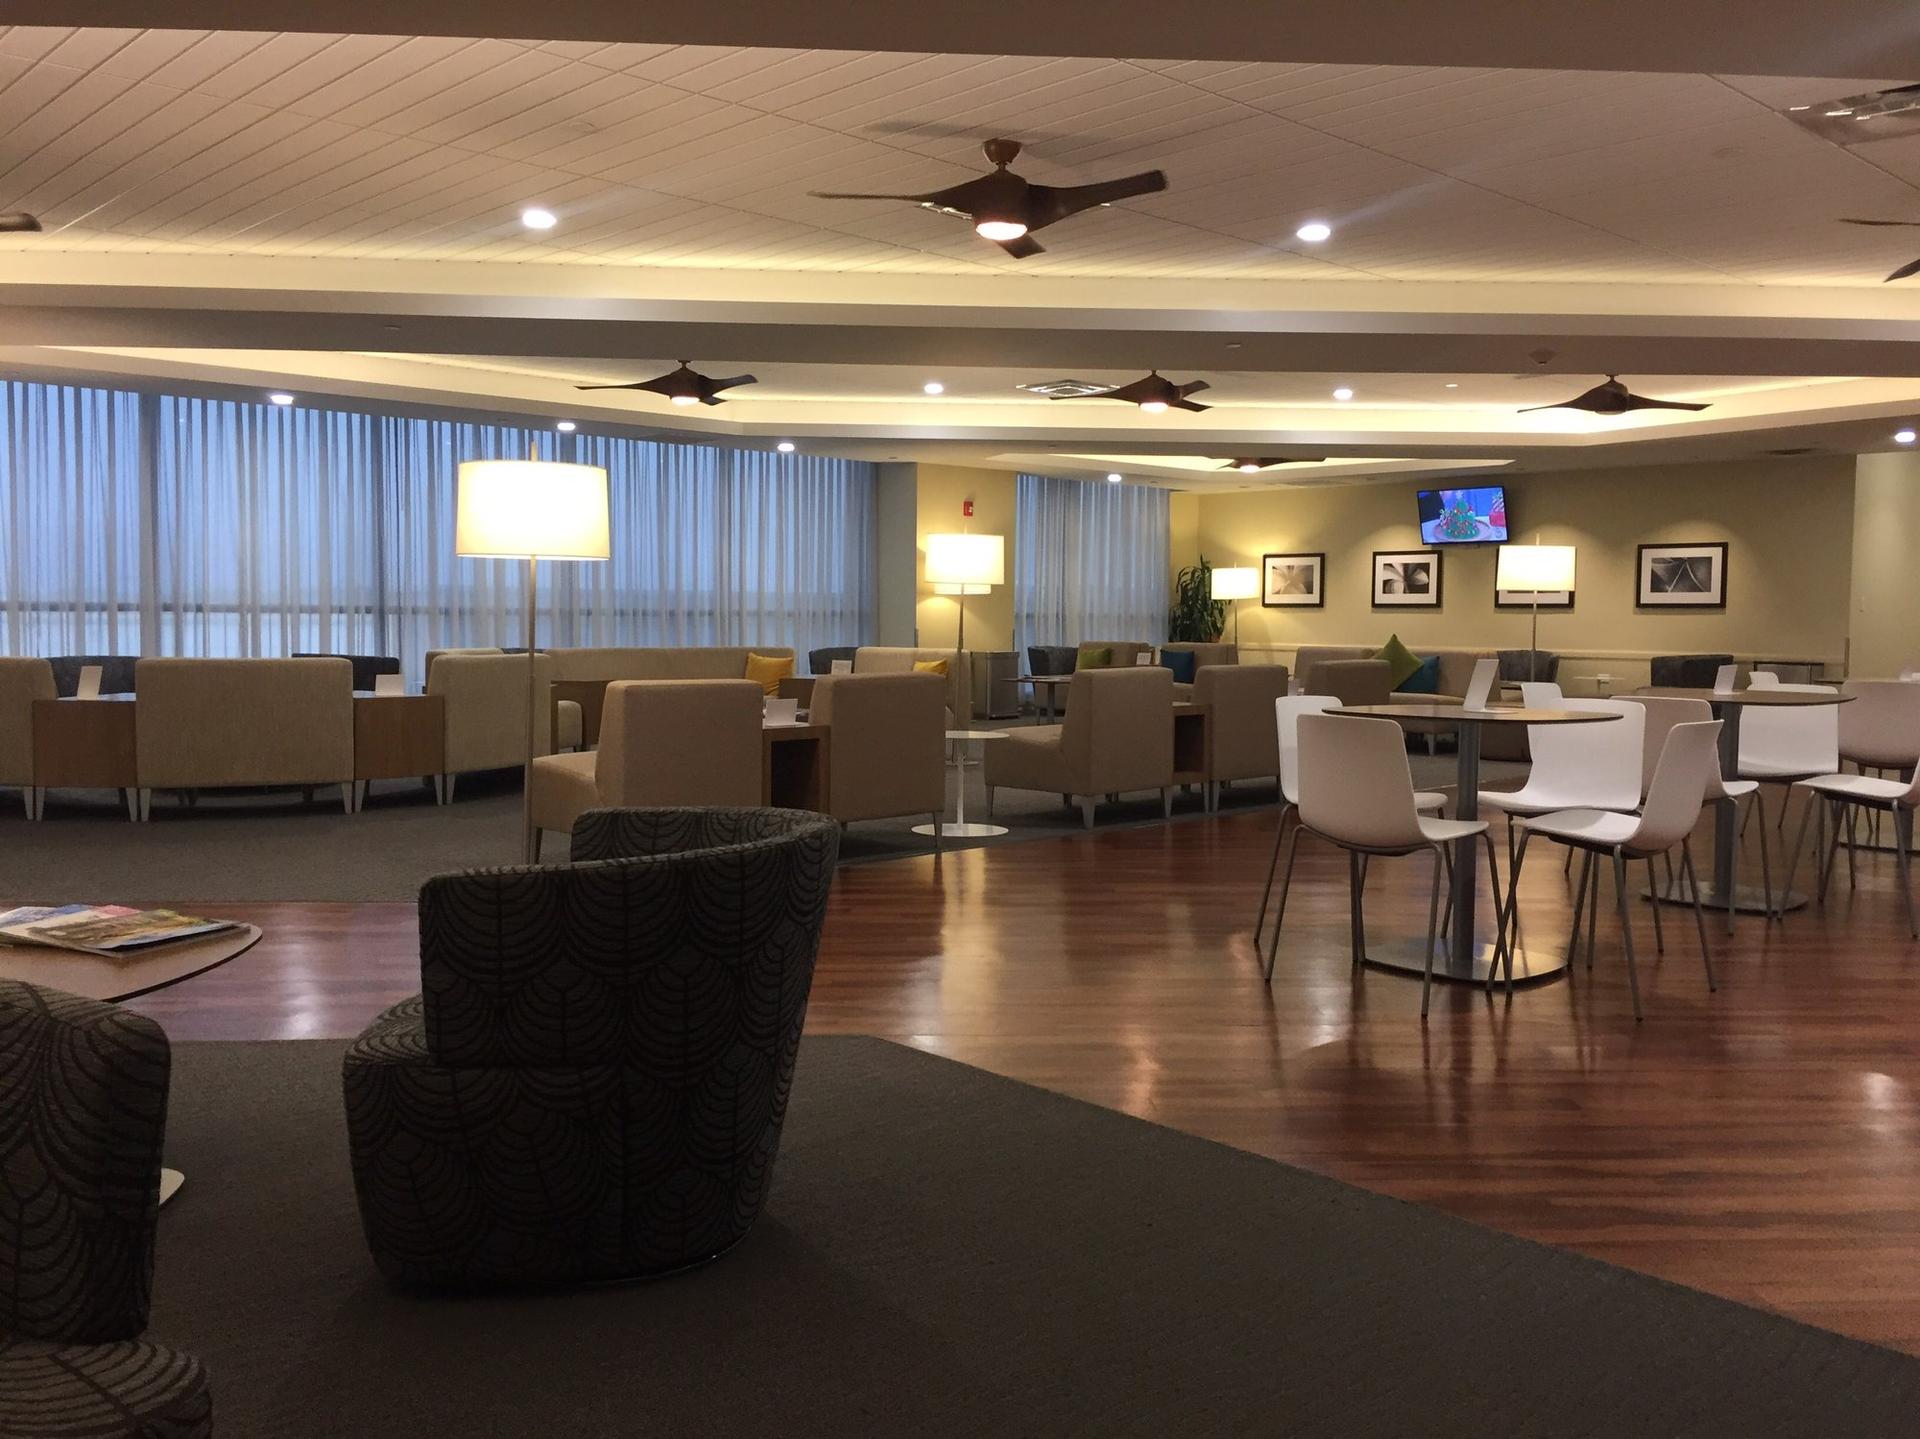 Hawaiian Airlines The Plumeria Lounge image 3 of 41